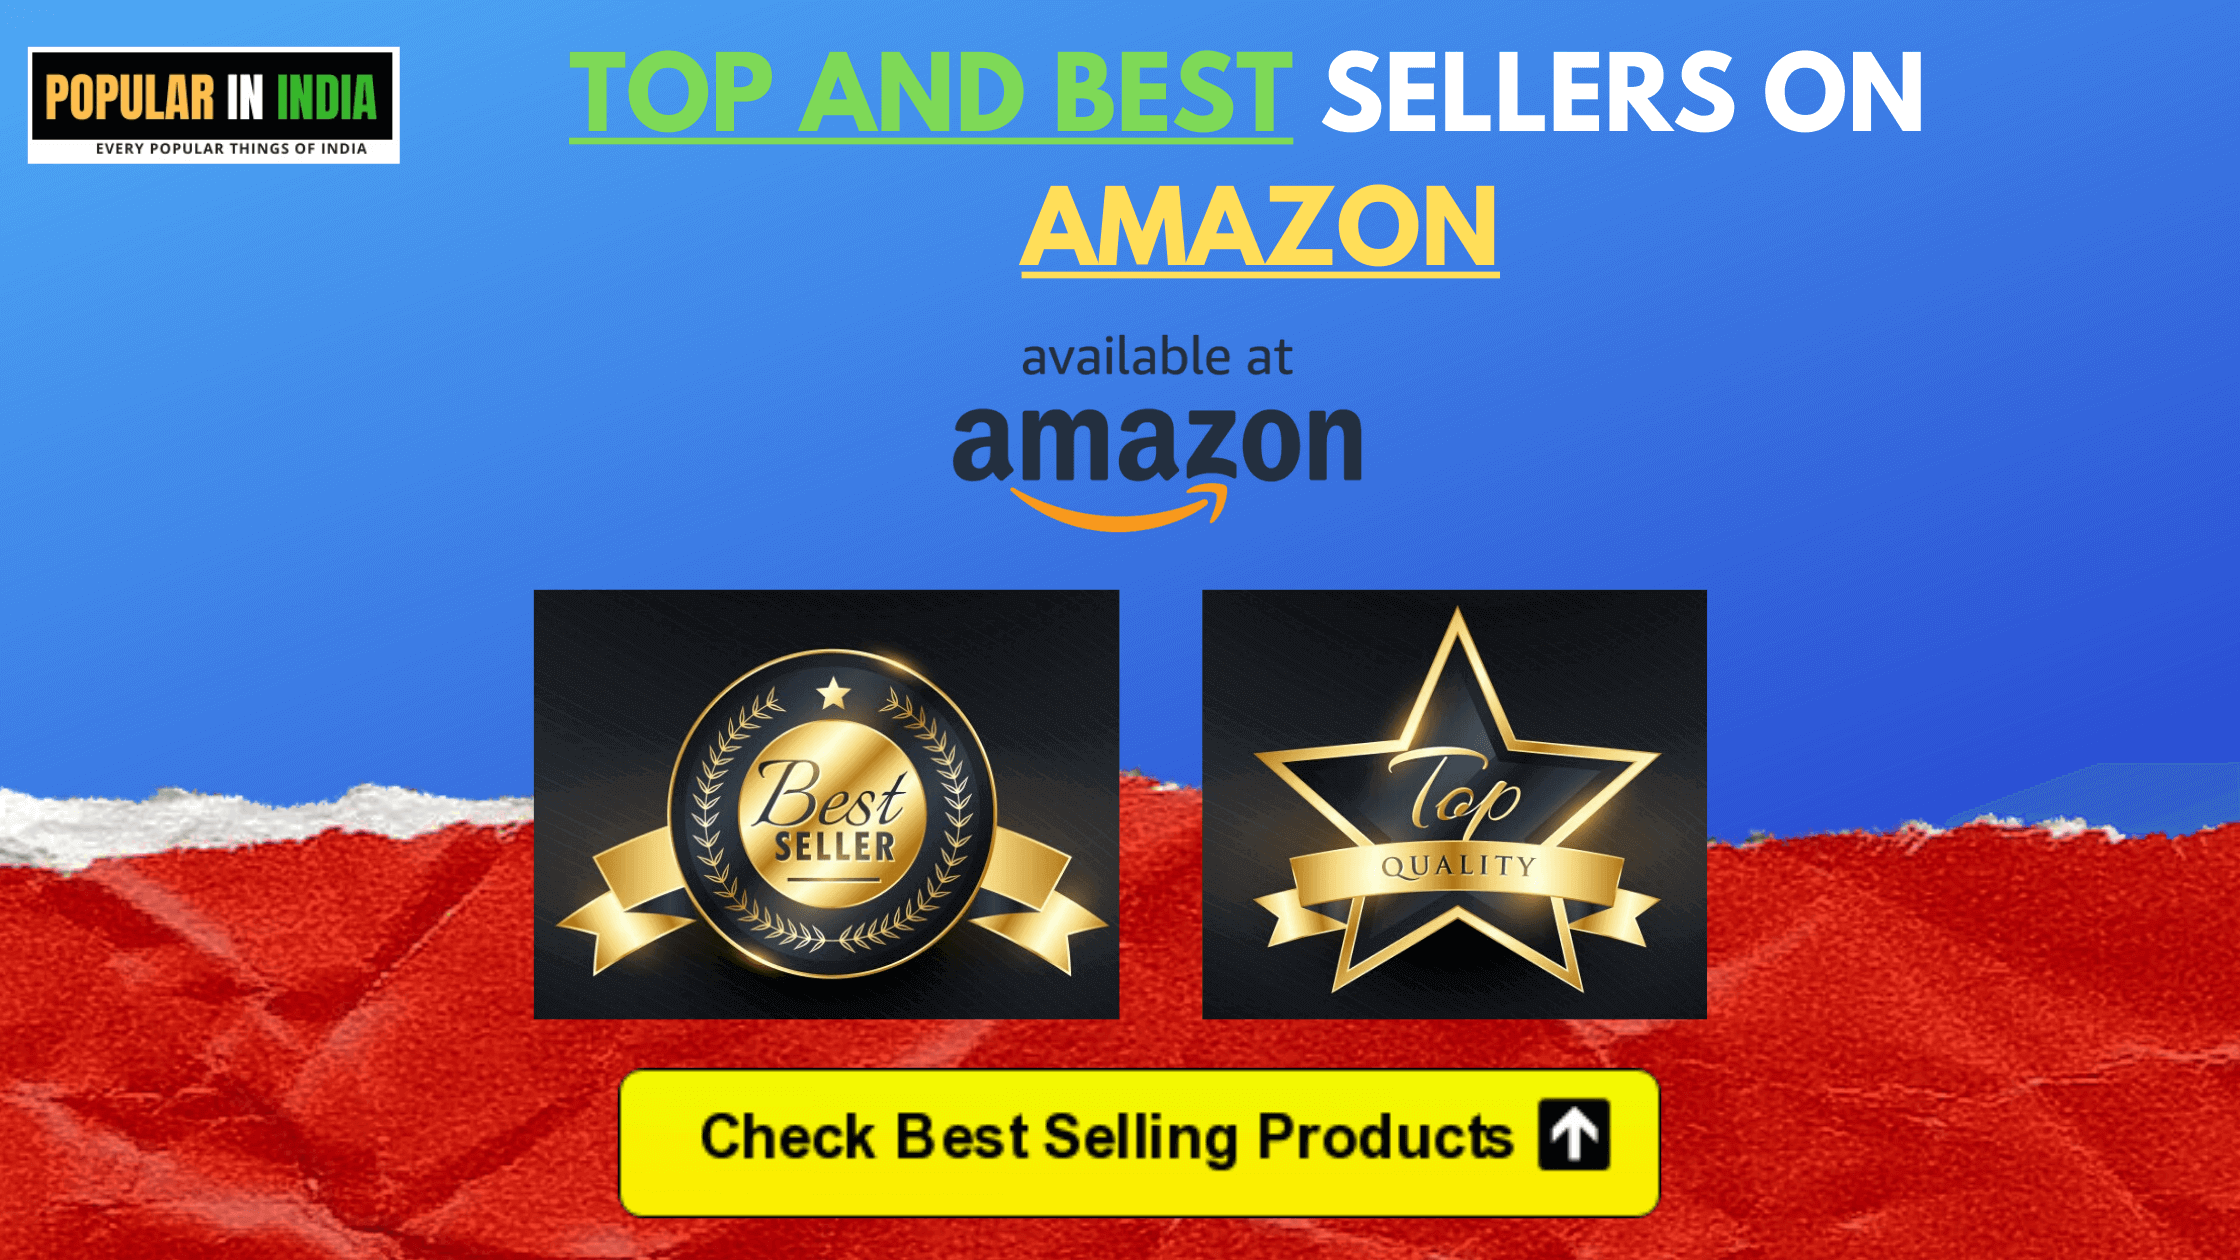 Buy Now from Top and Best Sellers on Amzon India